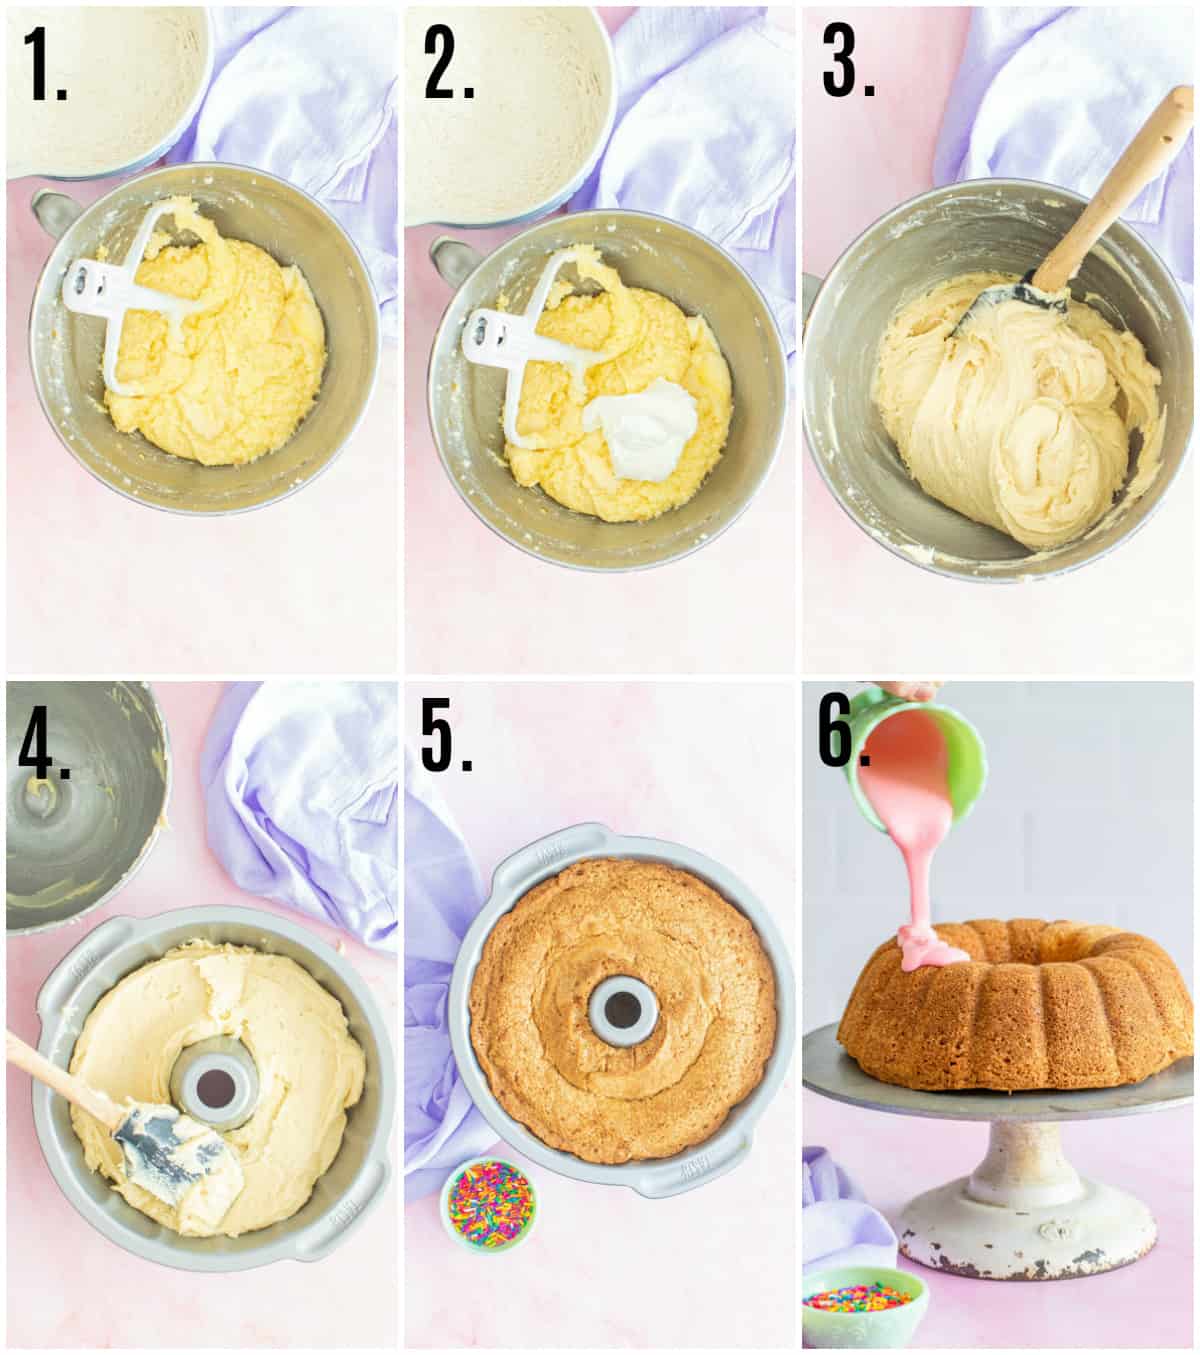 Step by step photos on how to make a donut cake